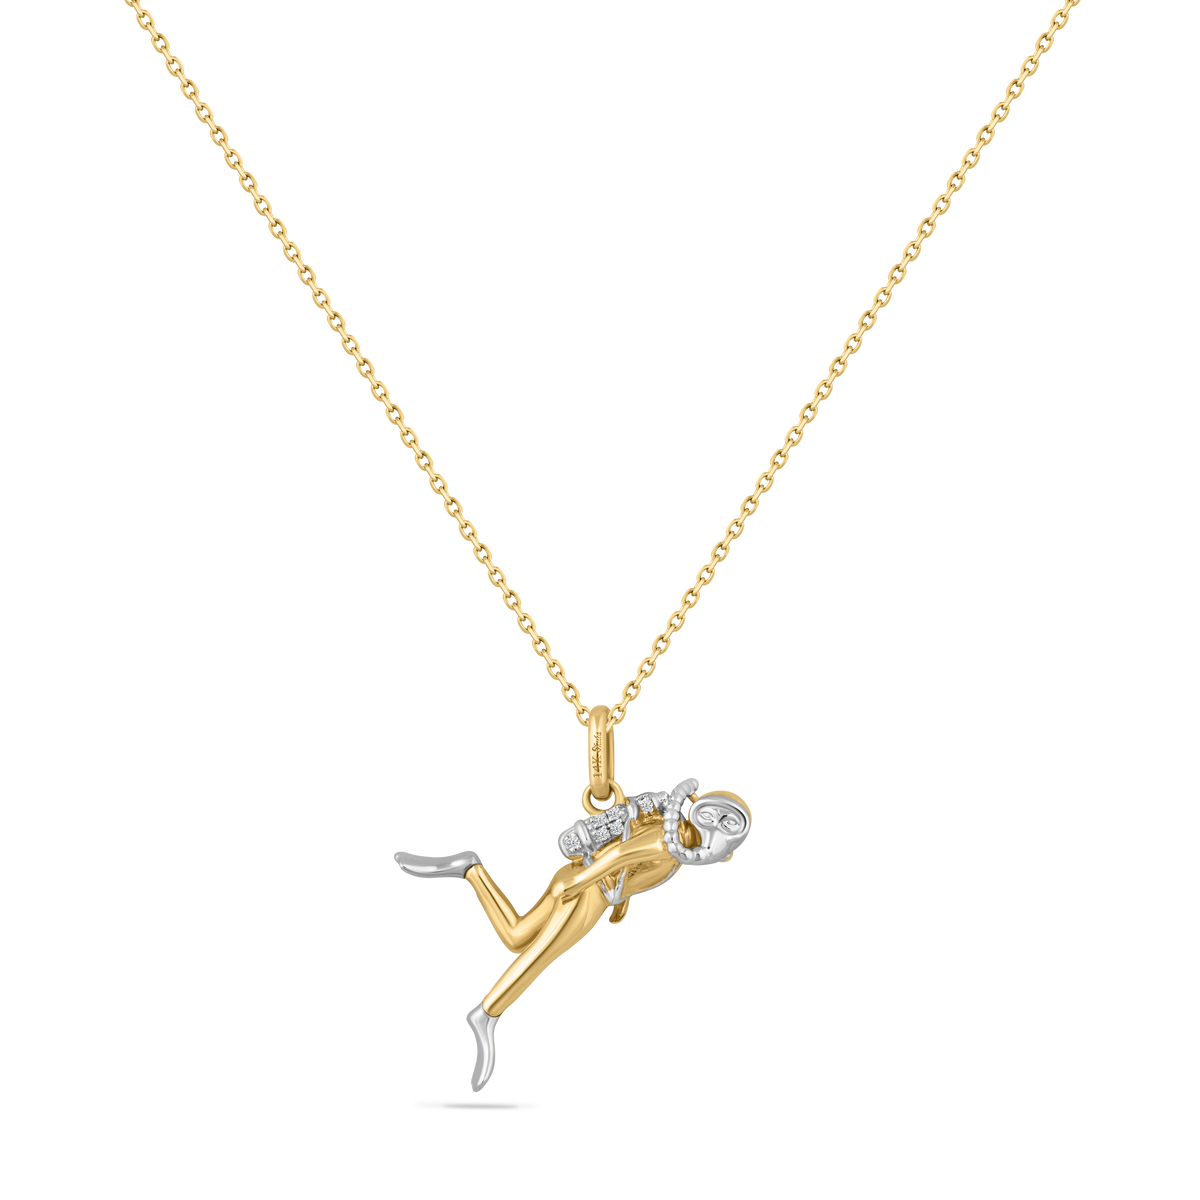 14K TT SMALL SUBA DIVER WITH 6 DIAMONDS 0.020CT ON 18 INCHES CHAIN